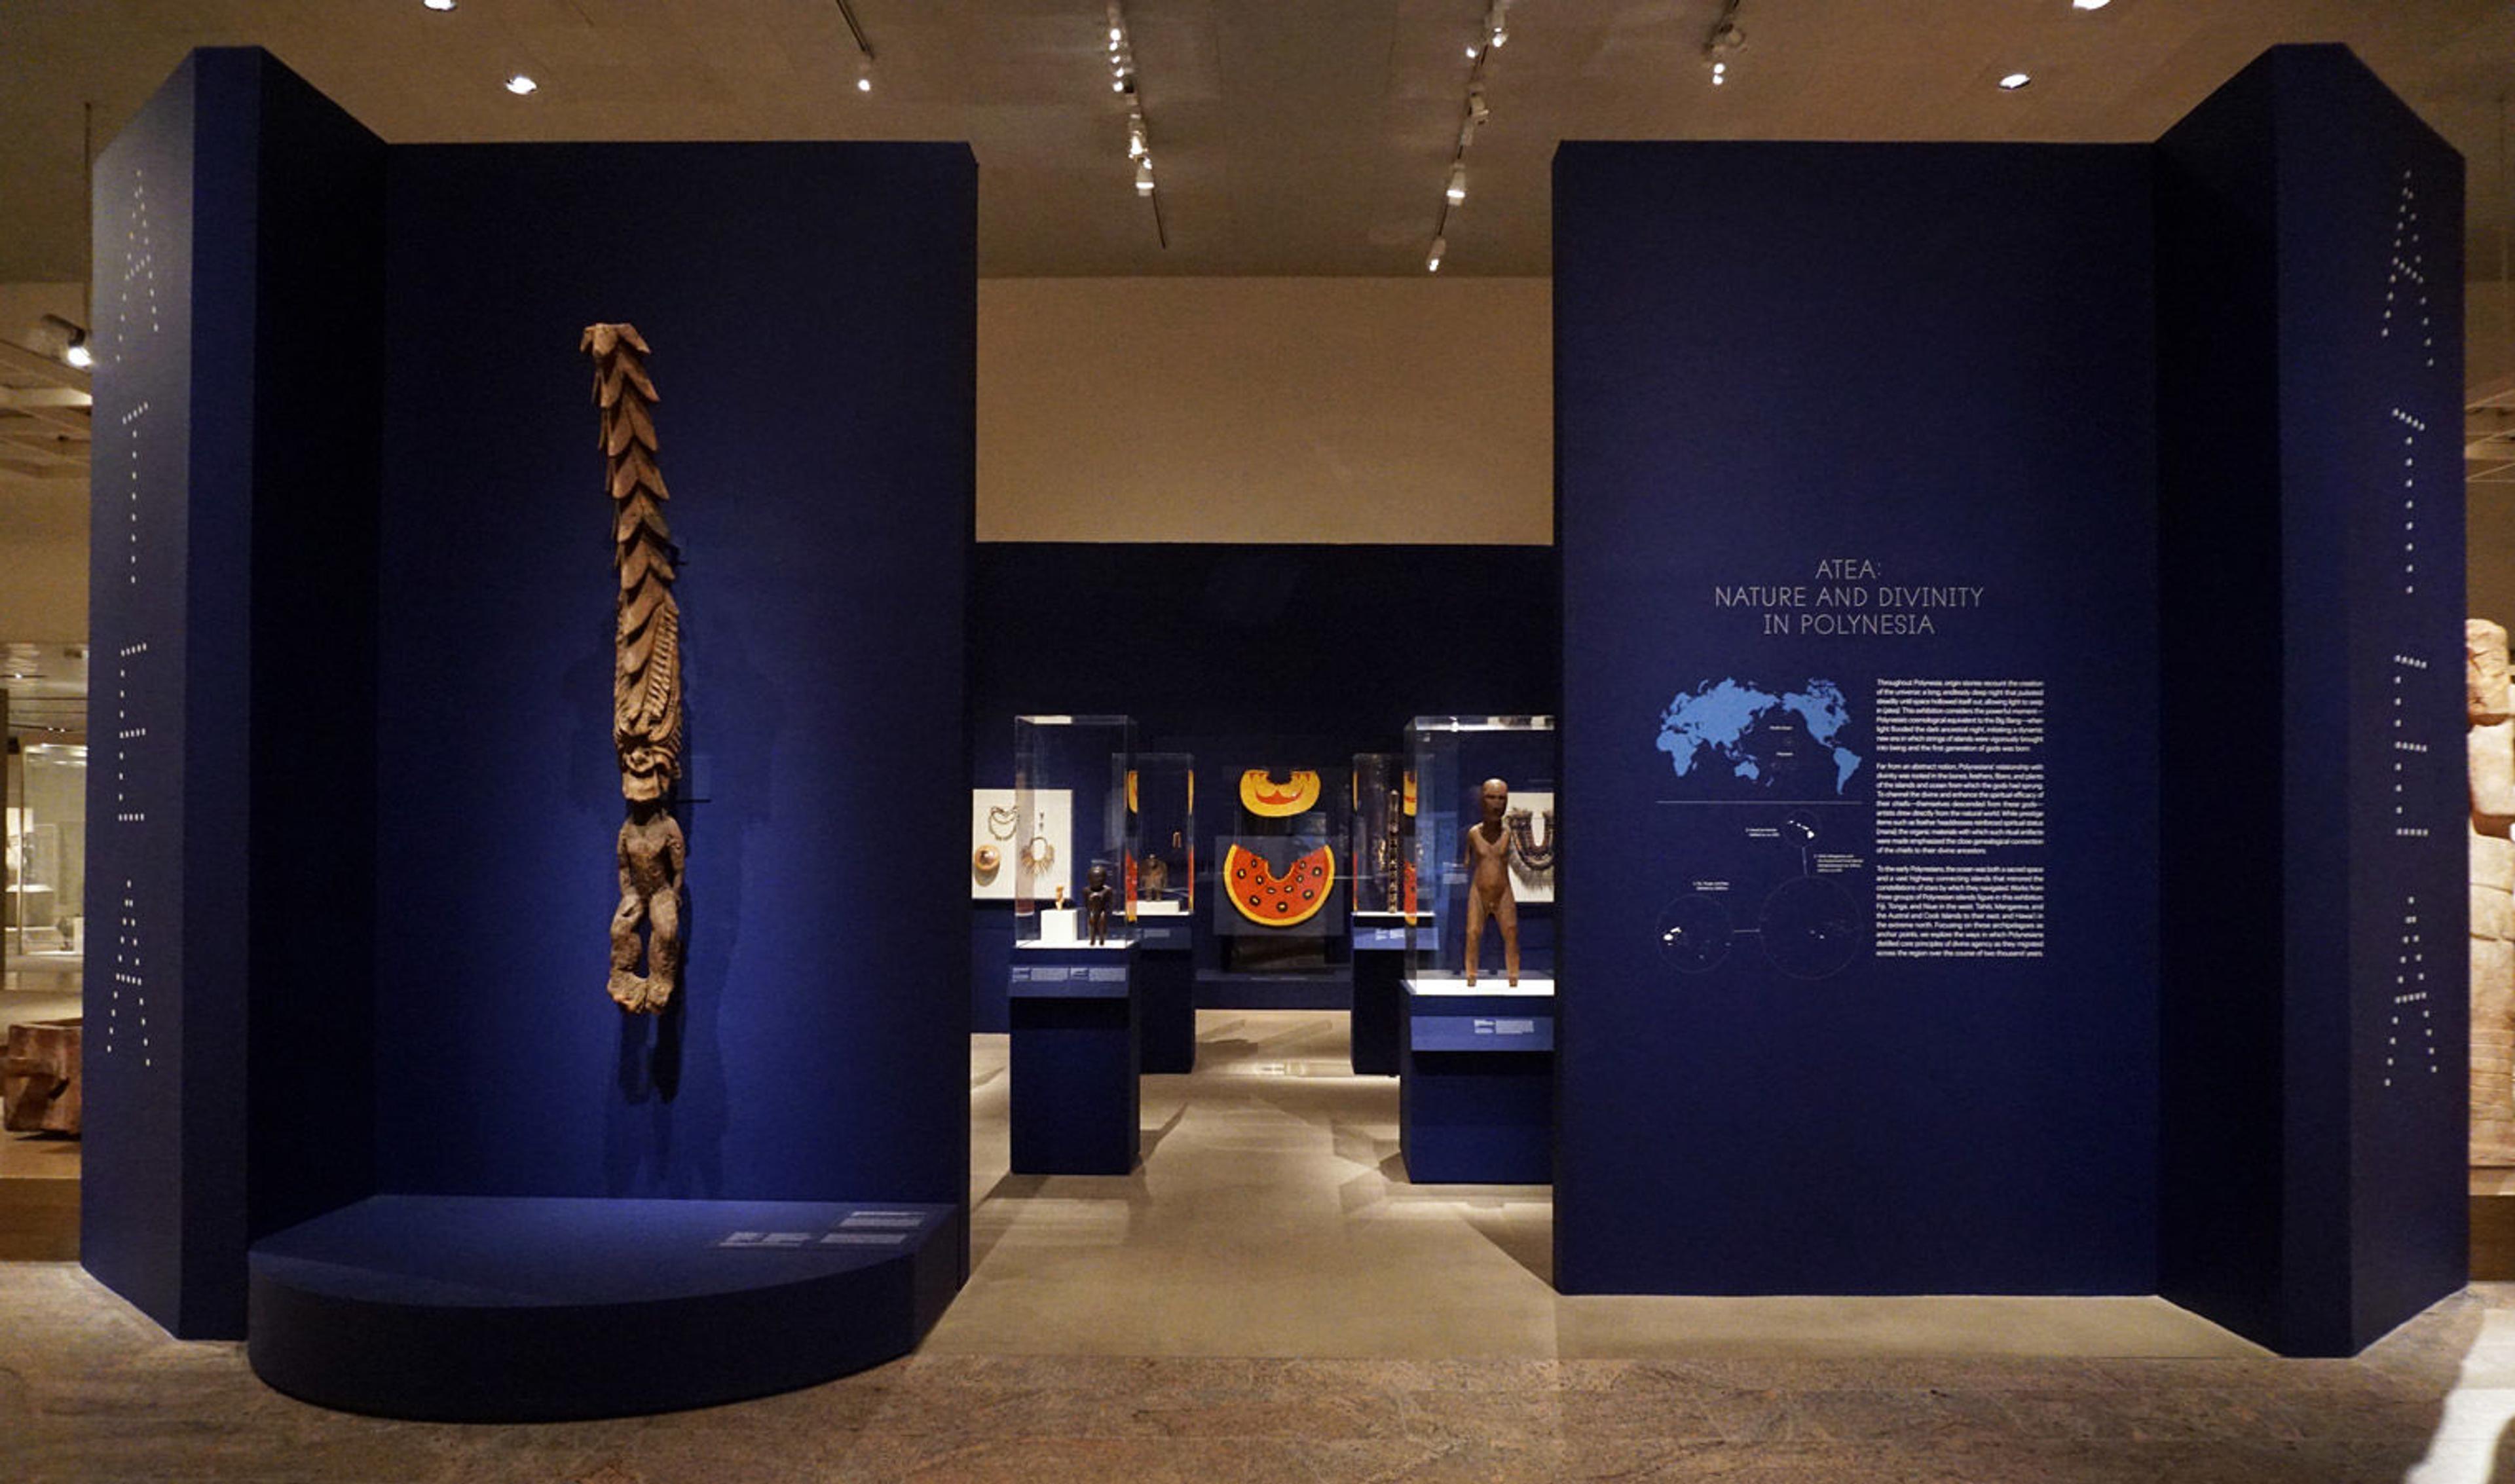 View of the entrance to the Met exhibition "Atea: Nature and Divinity in Polynesia"